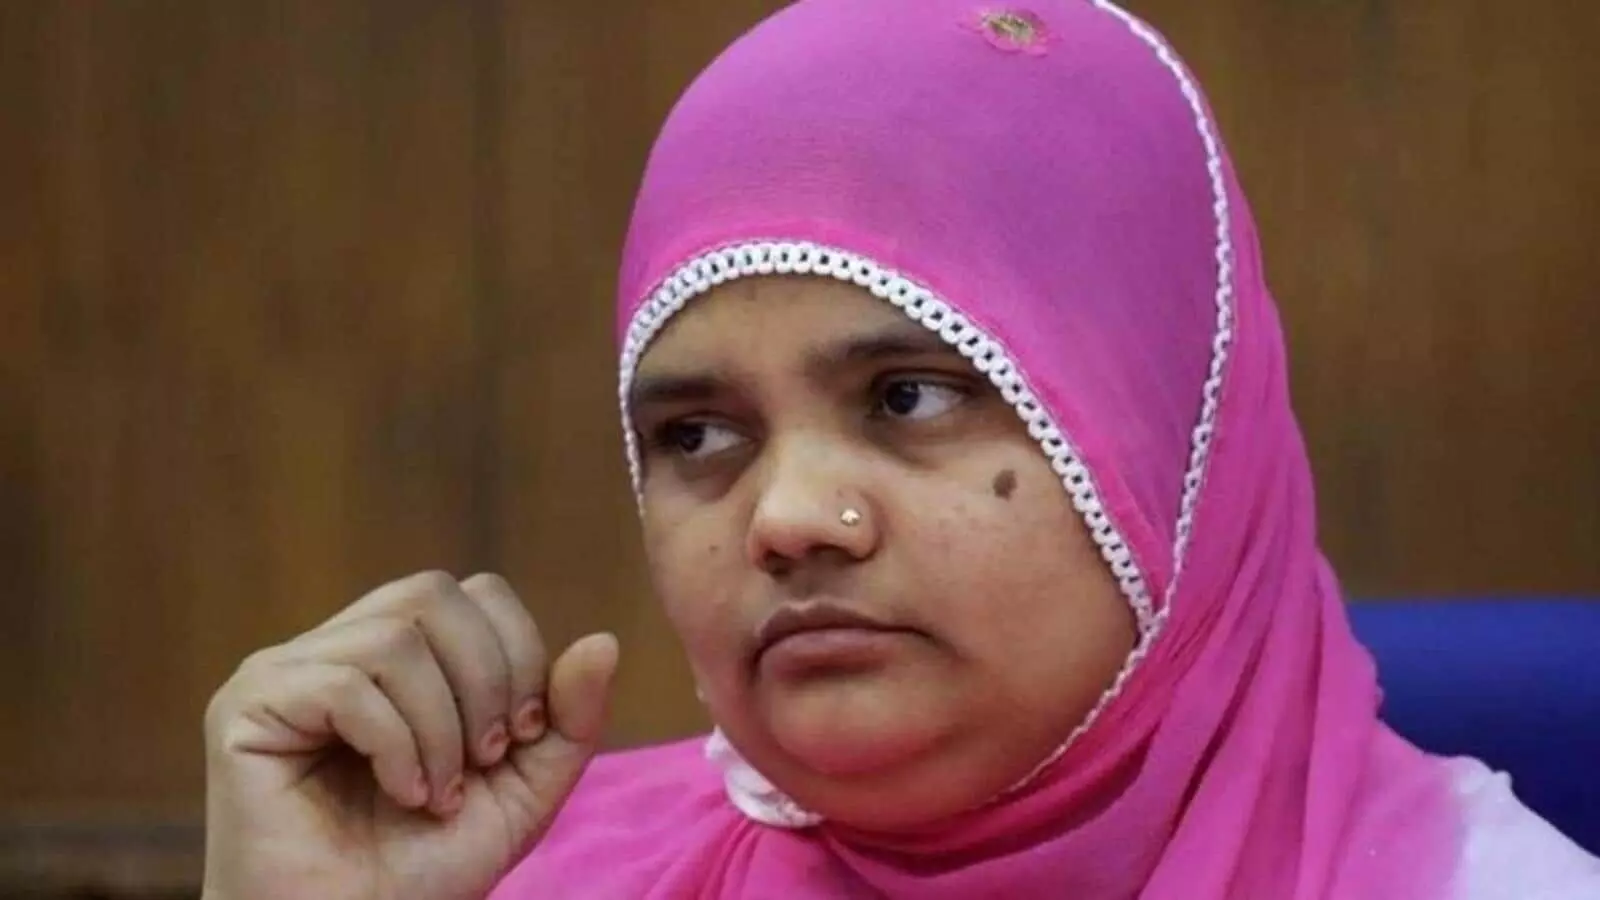 Bilkis Bano gangrape case: SC agrees to constitute special bench to hear plea against remission to convicts